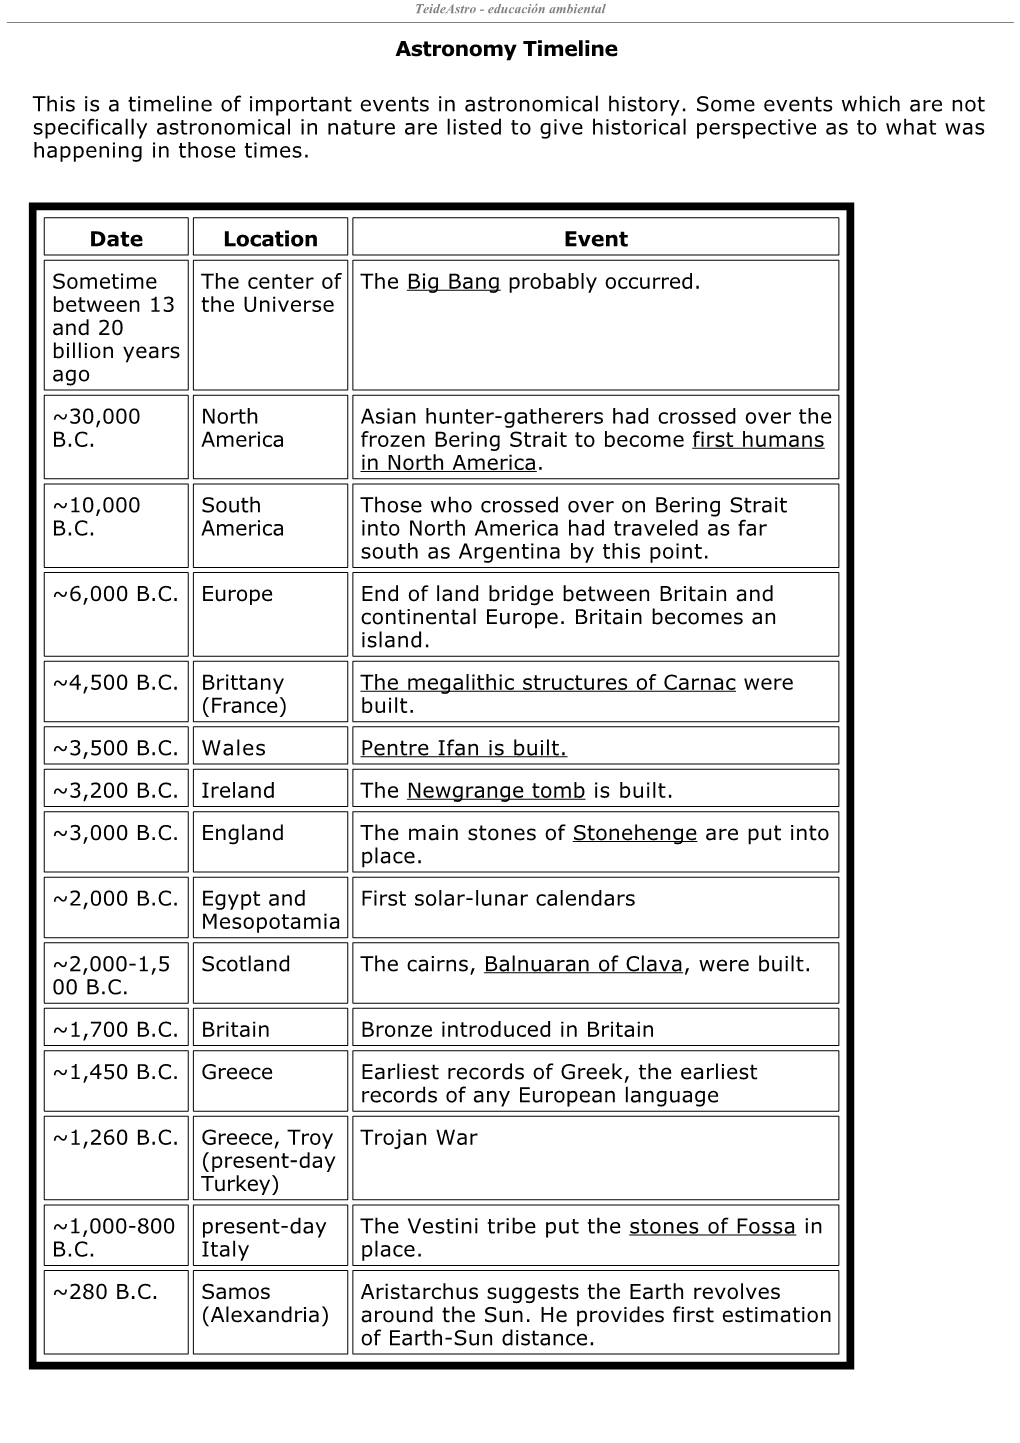 Astronomy Timeline This Is a Timeline of Important Events in Astronomical